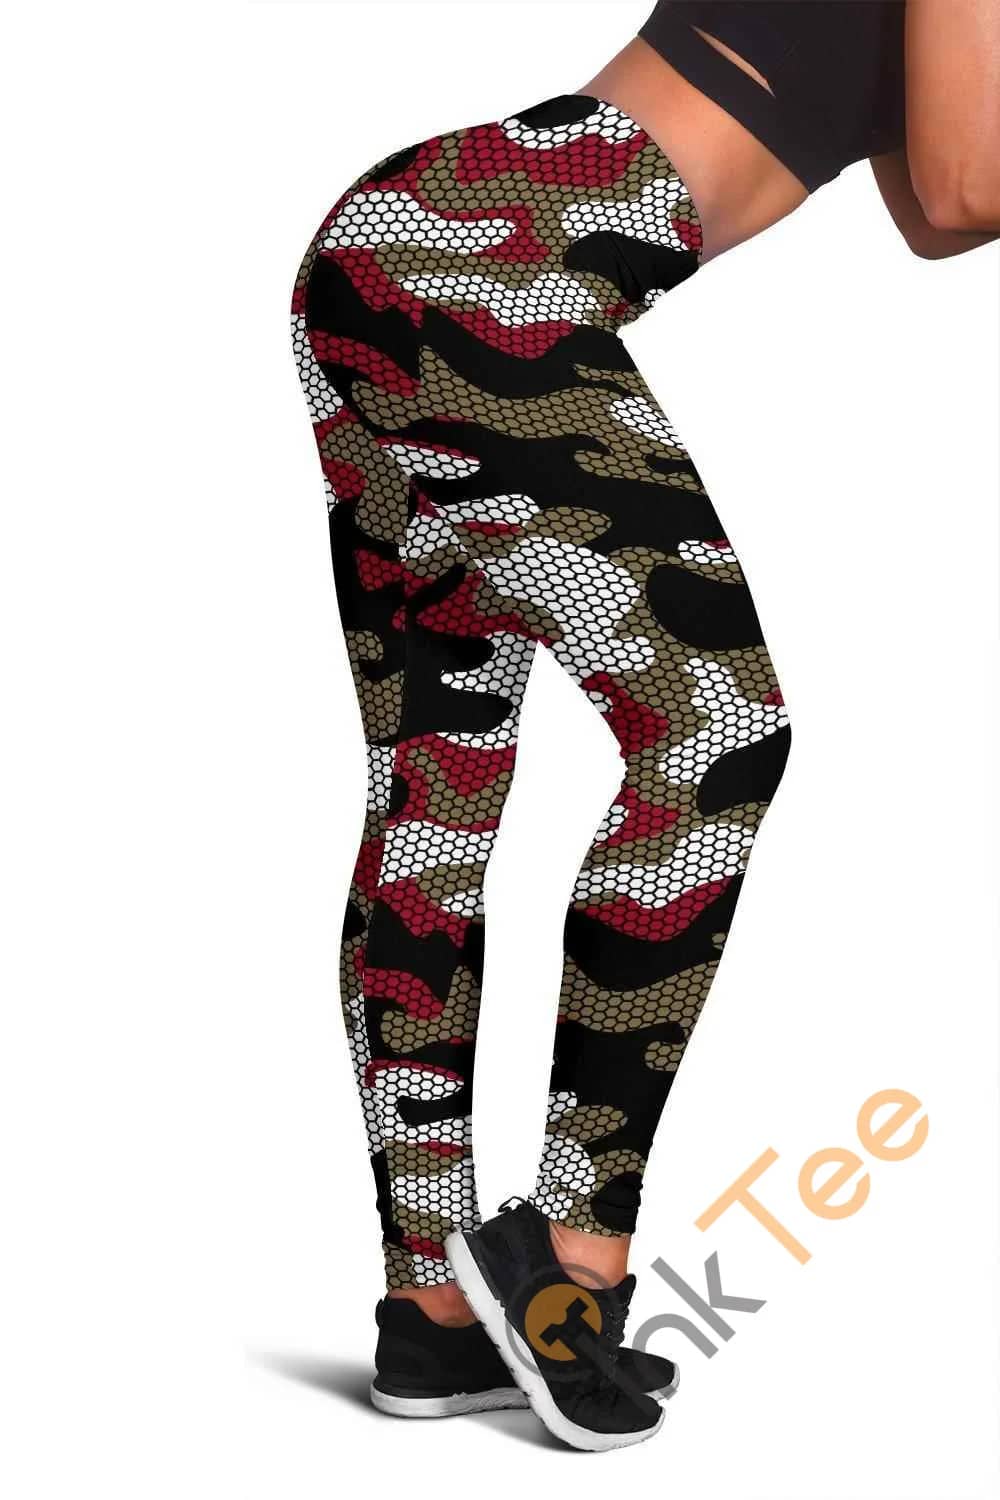 San Francisco 49ers Inspired Hex Camo 3D All Over Print For Yoga Fitness Fashion Women's Leggings